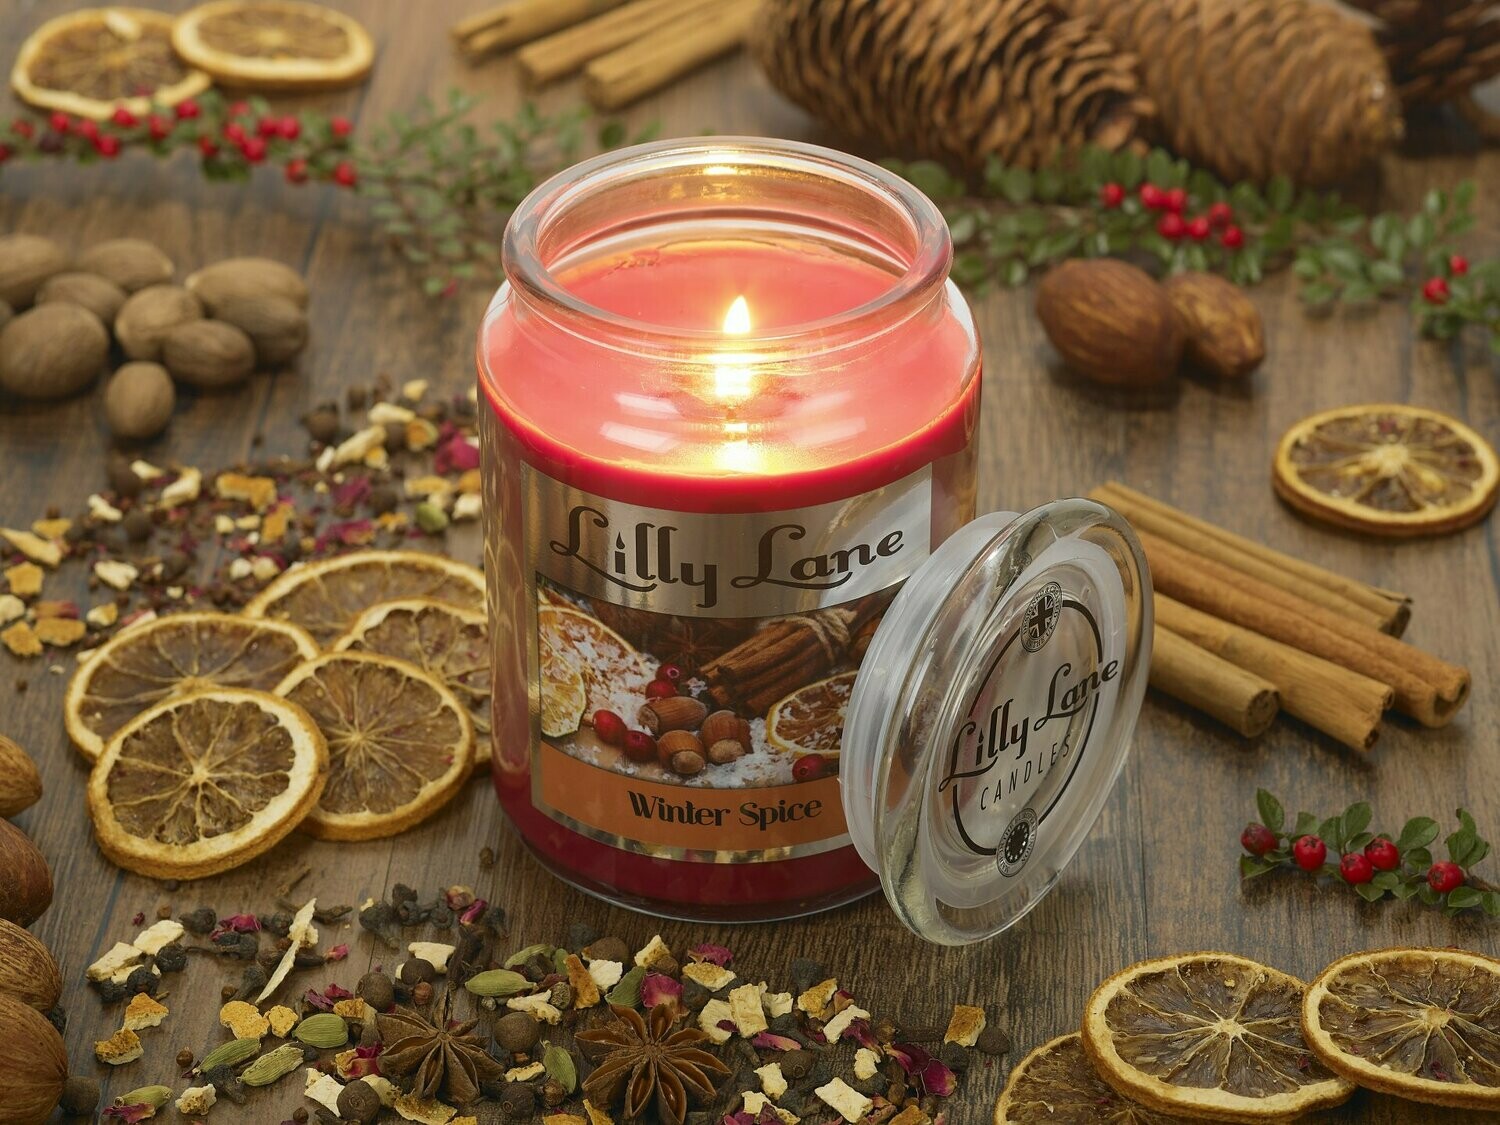 Lilly Lane Winter Spice 18oz Jar Candle